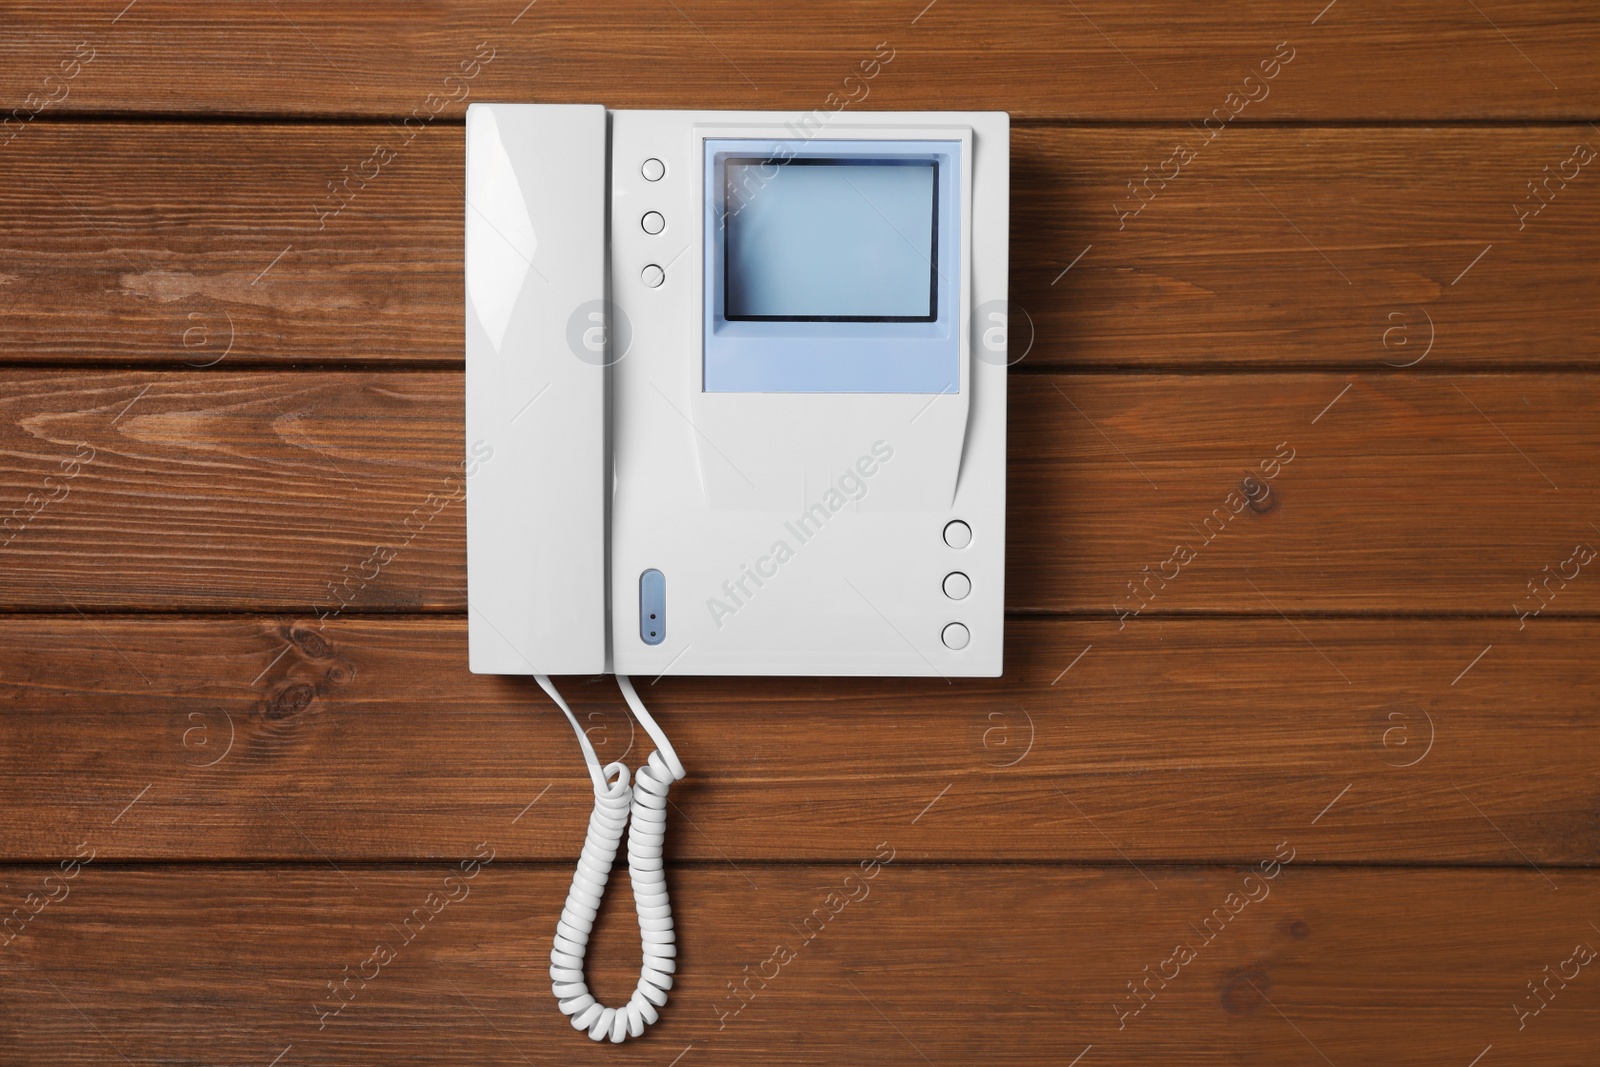 Photo of Modern intercom system with handset on wooden background, top view